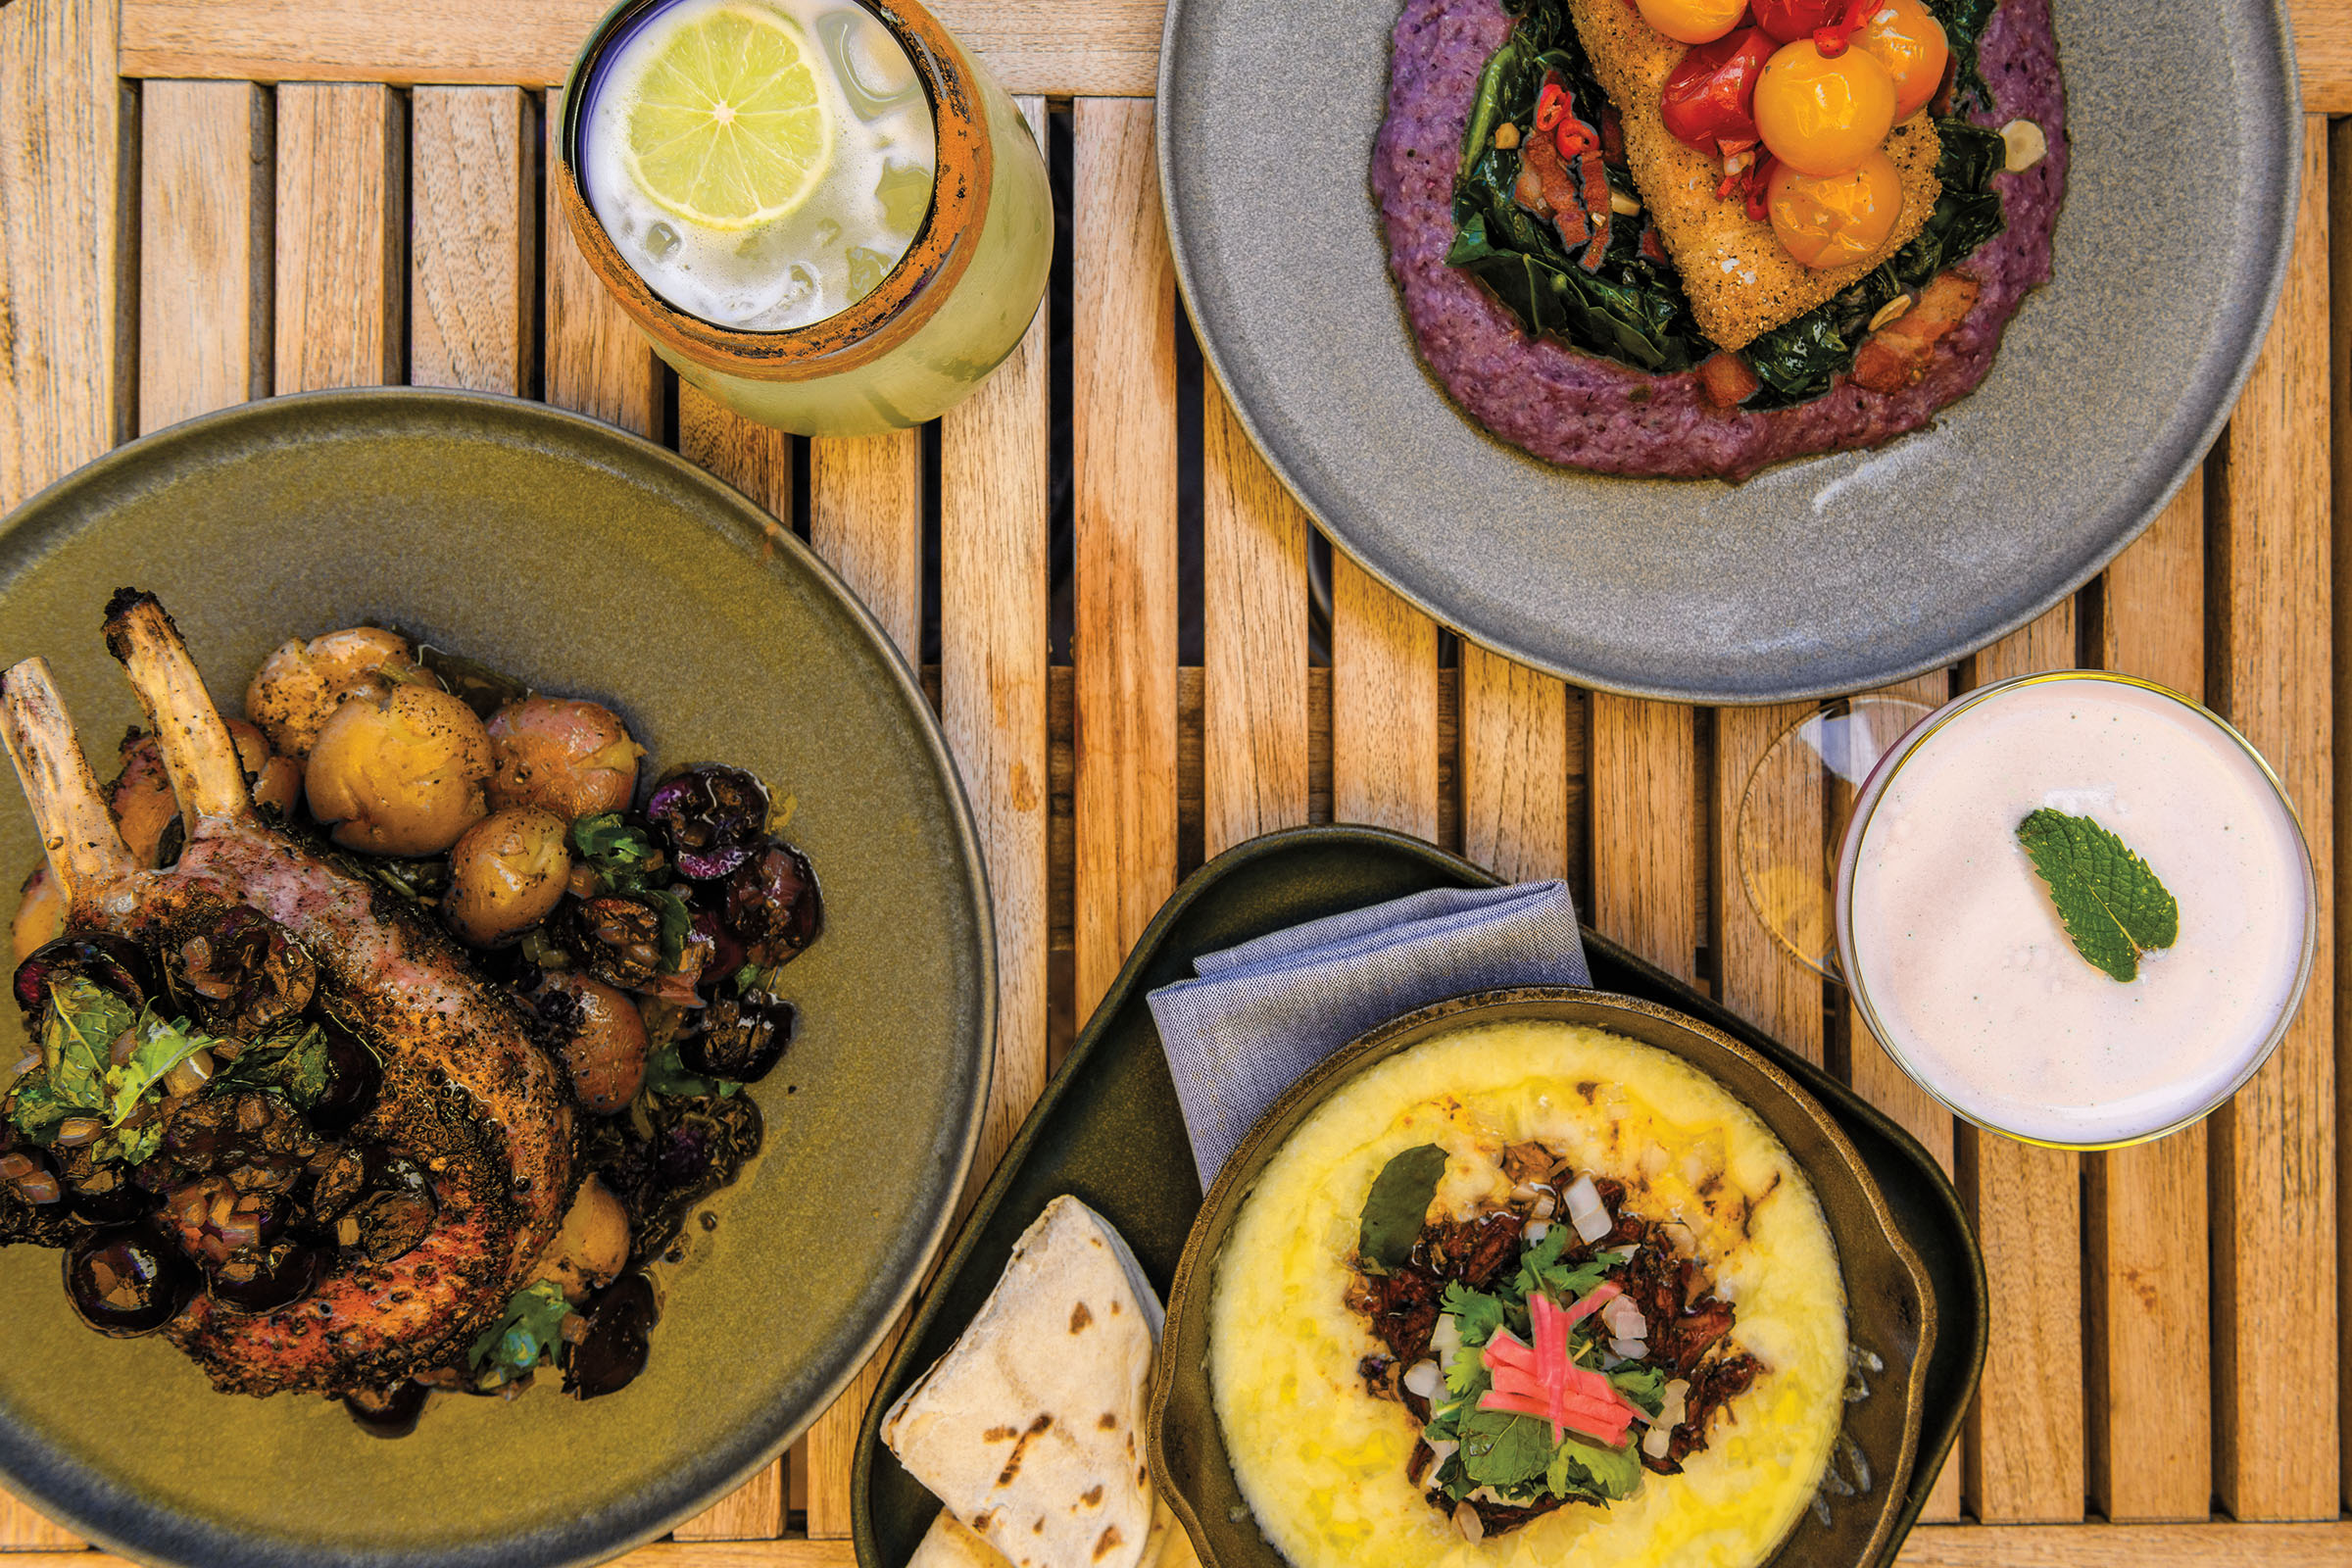 An overhead view of numerous colorful dishes on earth-toned plates and a wooden table